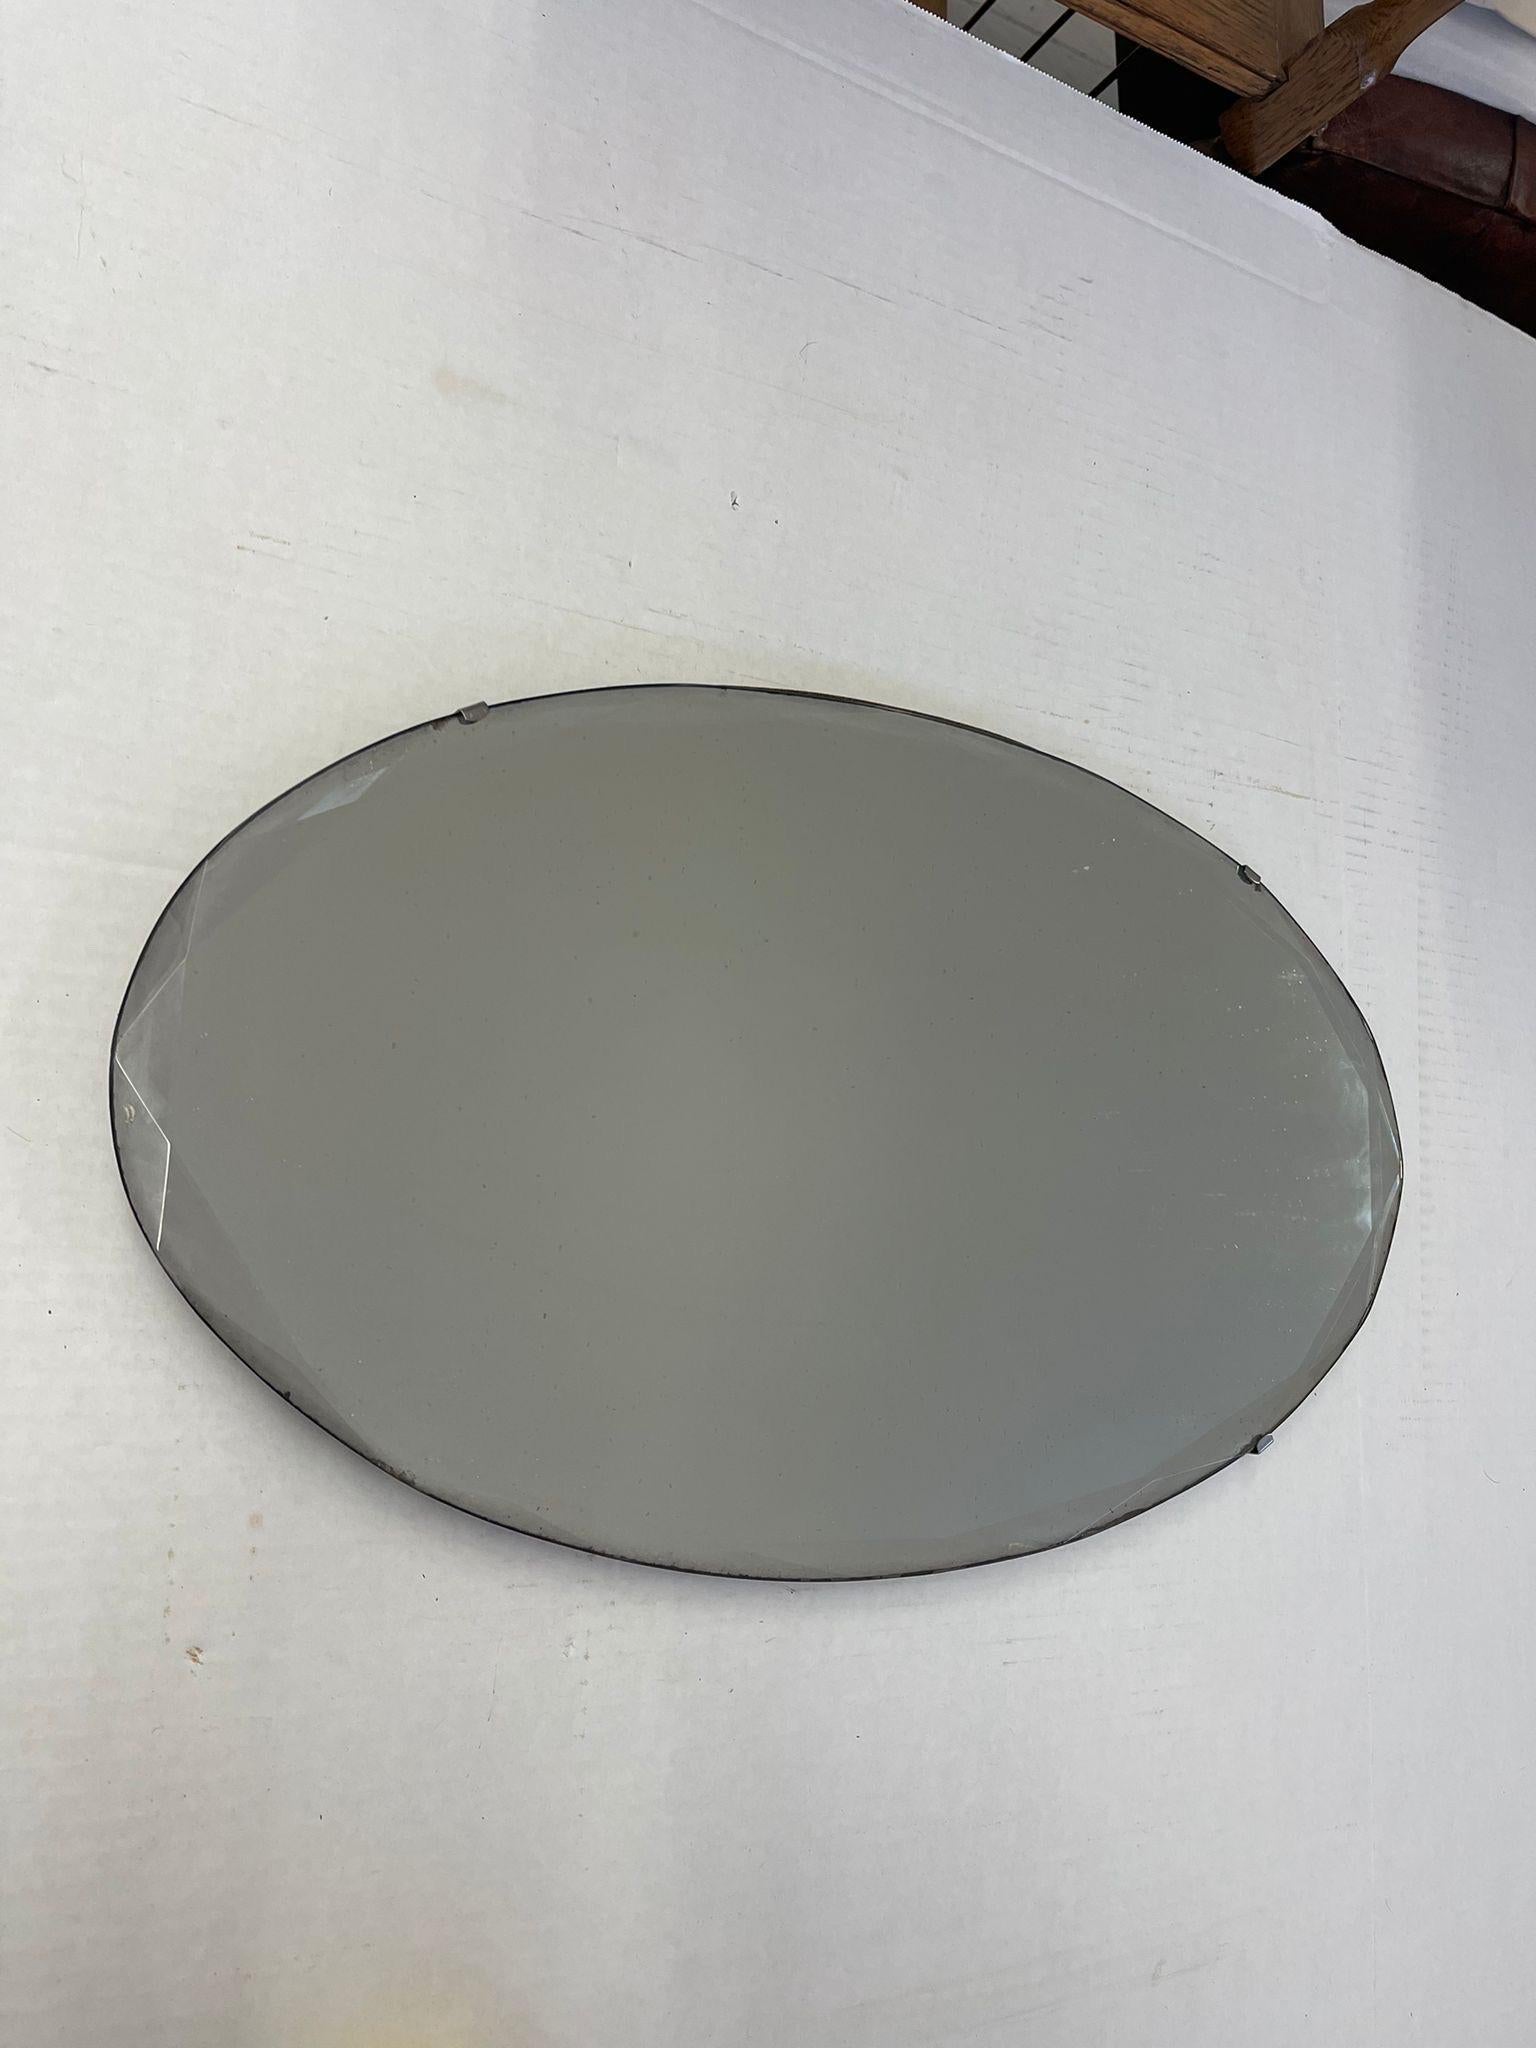 Gorgeous Oval Vintage Mirror that Catches Sunlight Beautifully. Petina Consistent with Age. Vintage Condition Consistent with Age as Pictured.

Dimensions. 22 W ; 13 H